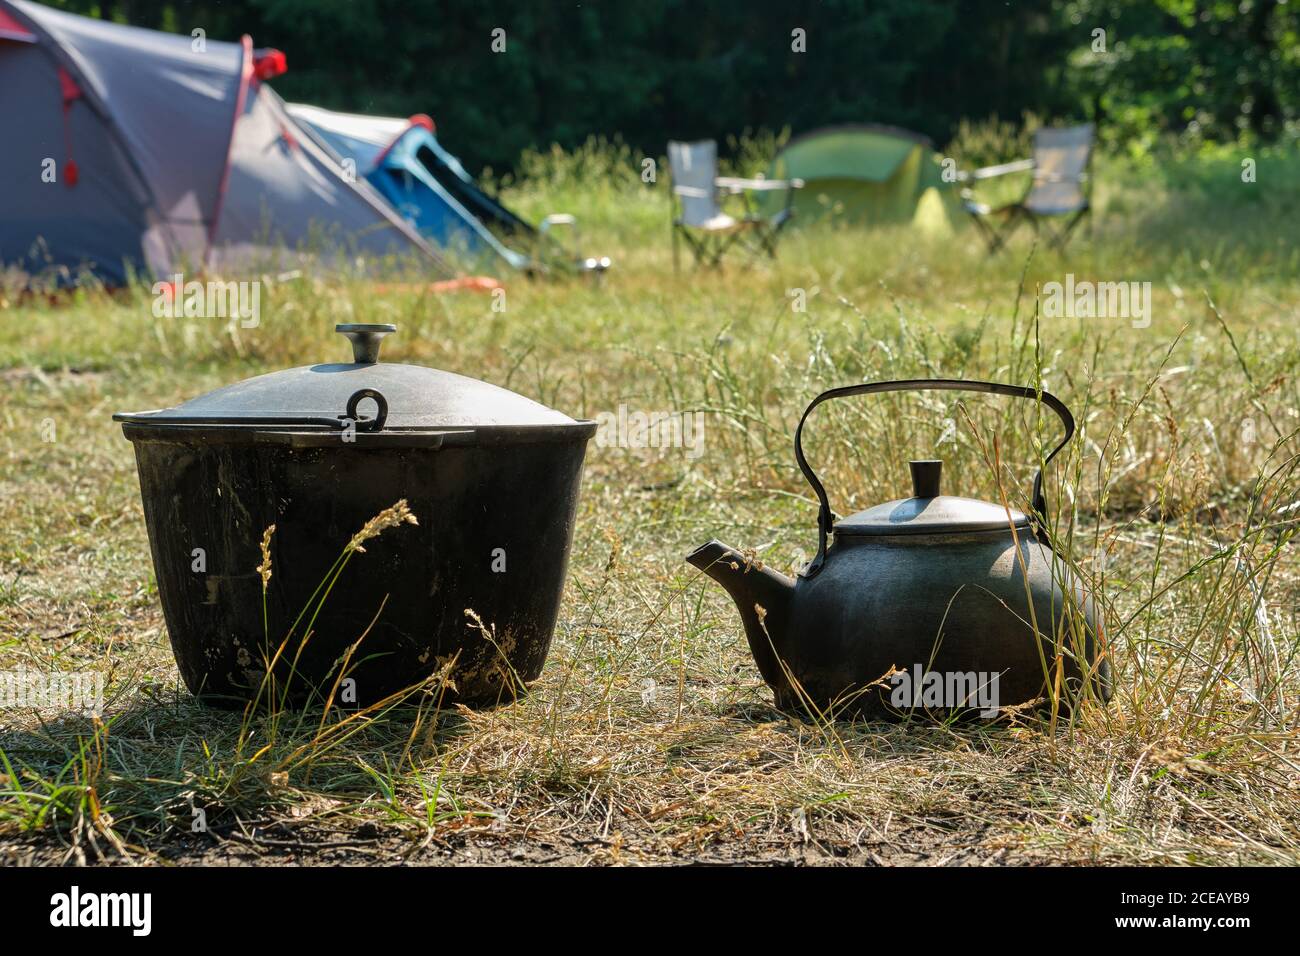 Tourist camp. A kettle and a tourist cooking pot. Camping tents and folding chairs on background. Stock Photo